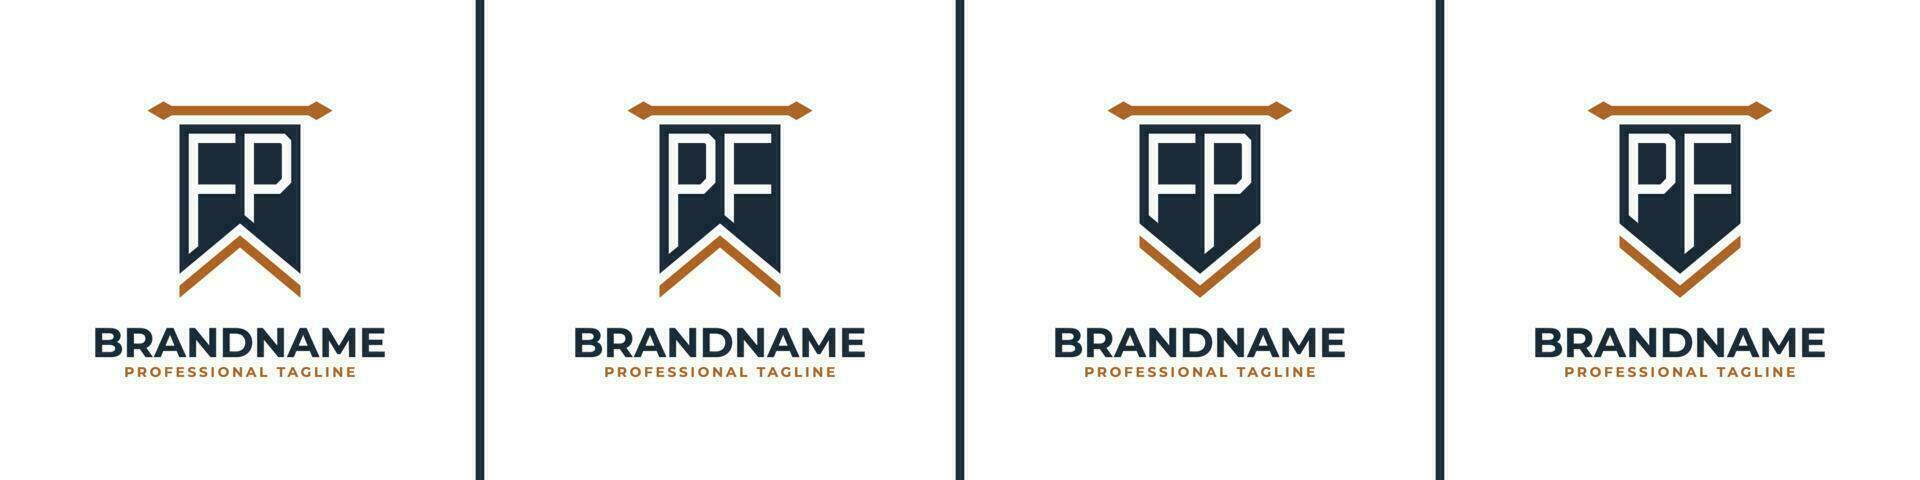 Letter FP and PF Pennant Flag Logo Set, Represent Victory. Suitable for any business with FP or PF initials. vector